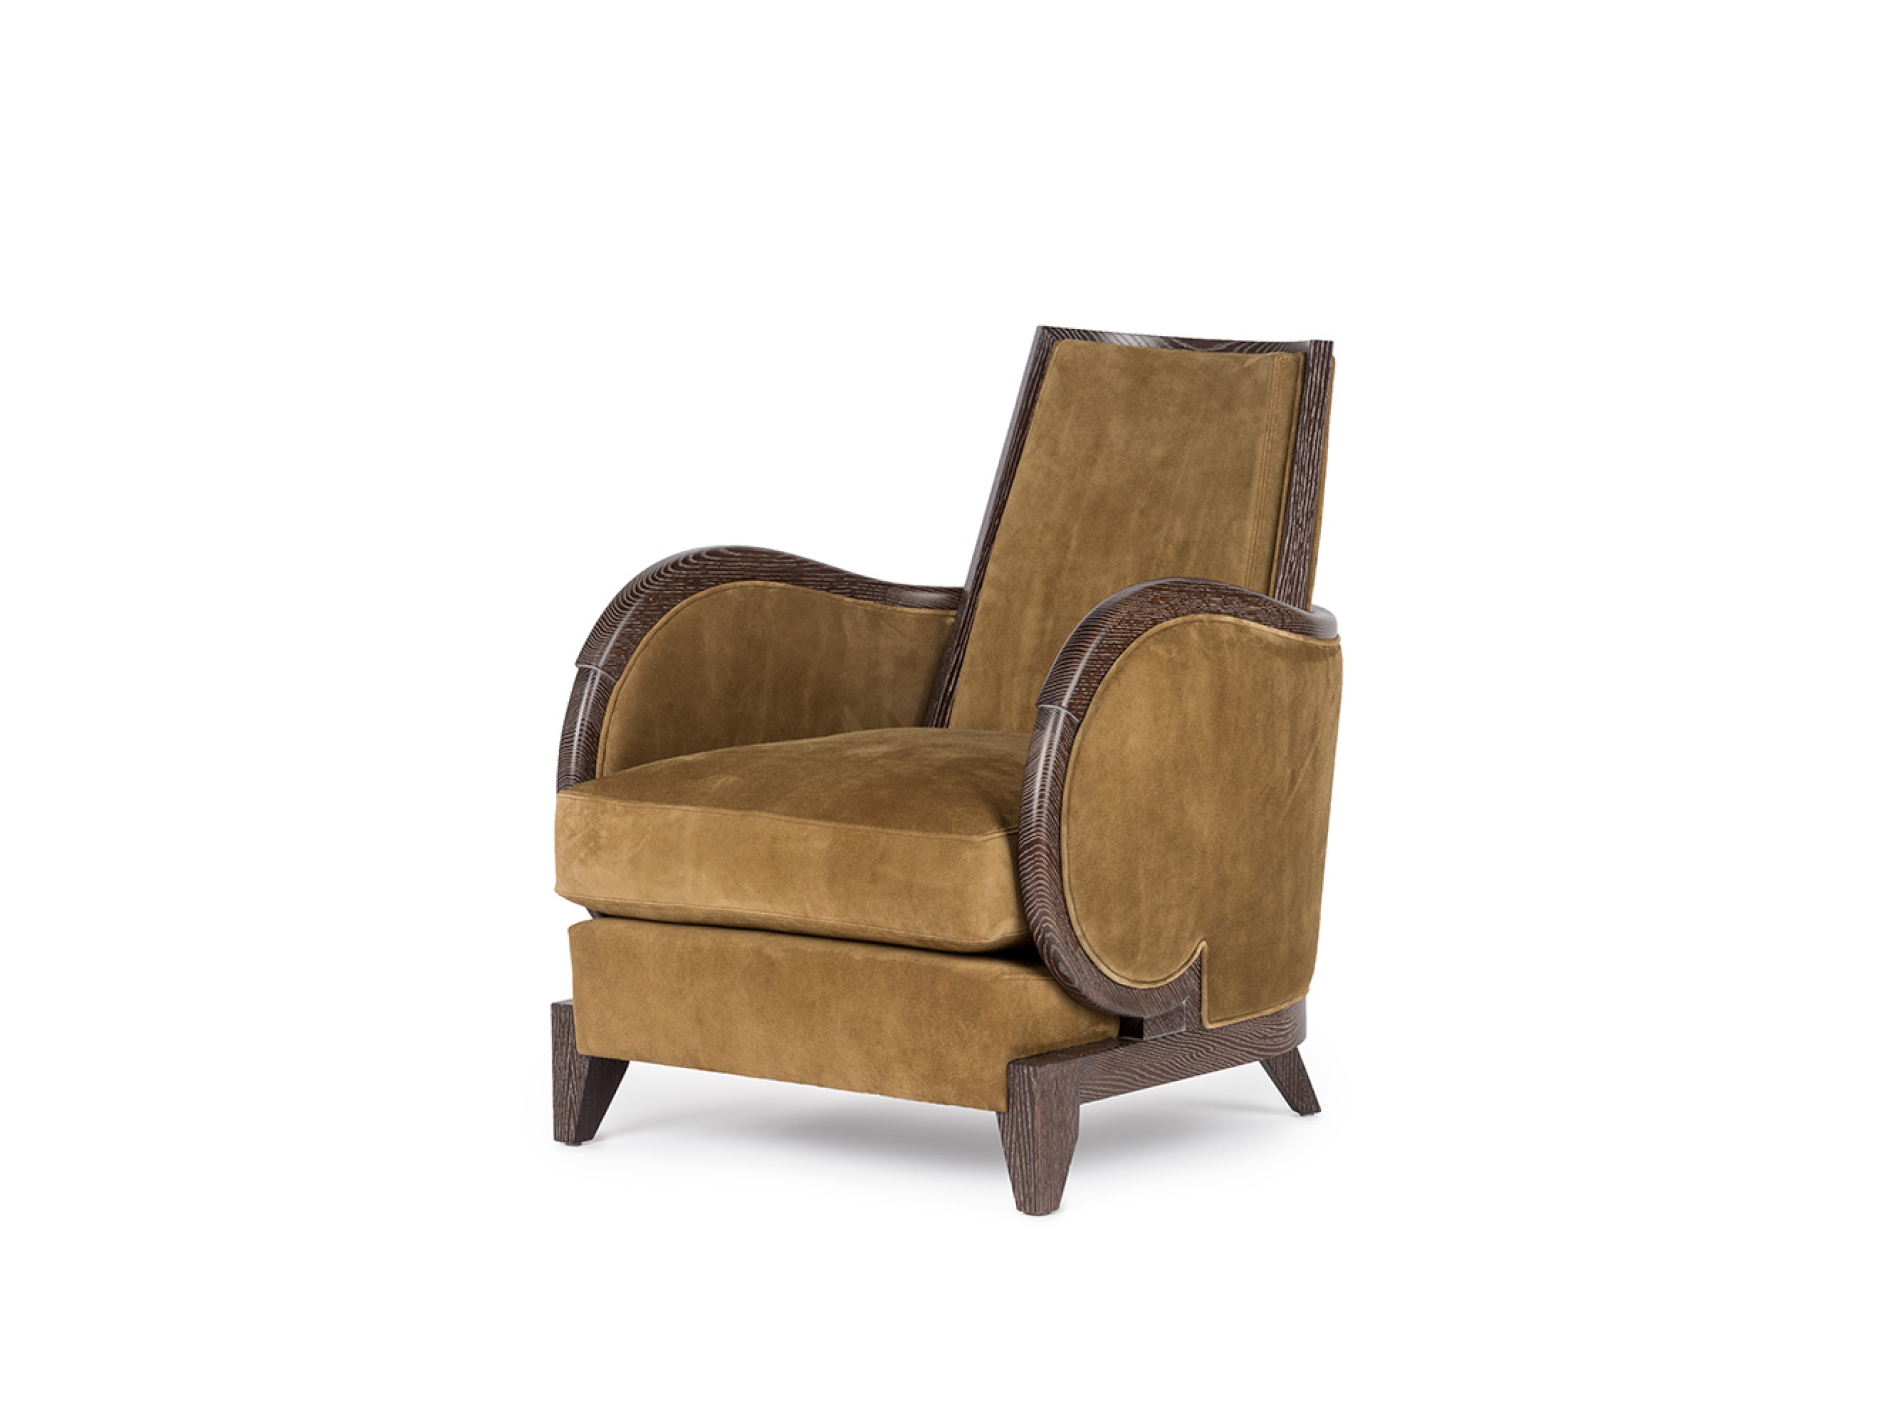 The Hudson Club Chair — SOLO by Allan Switzer